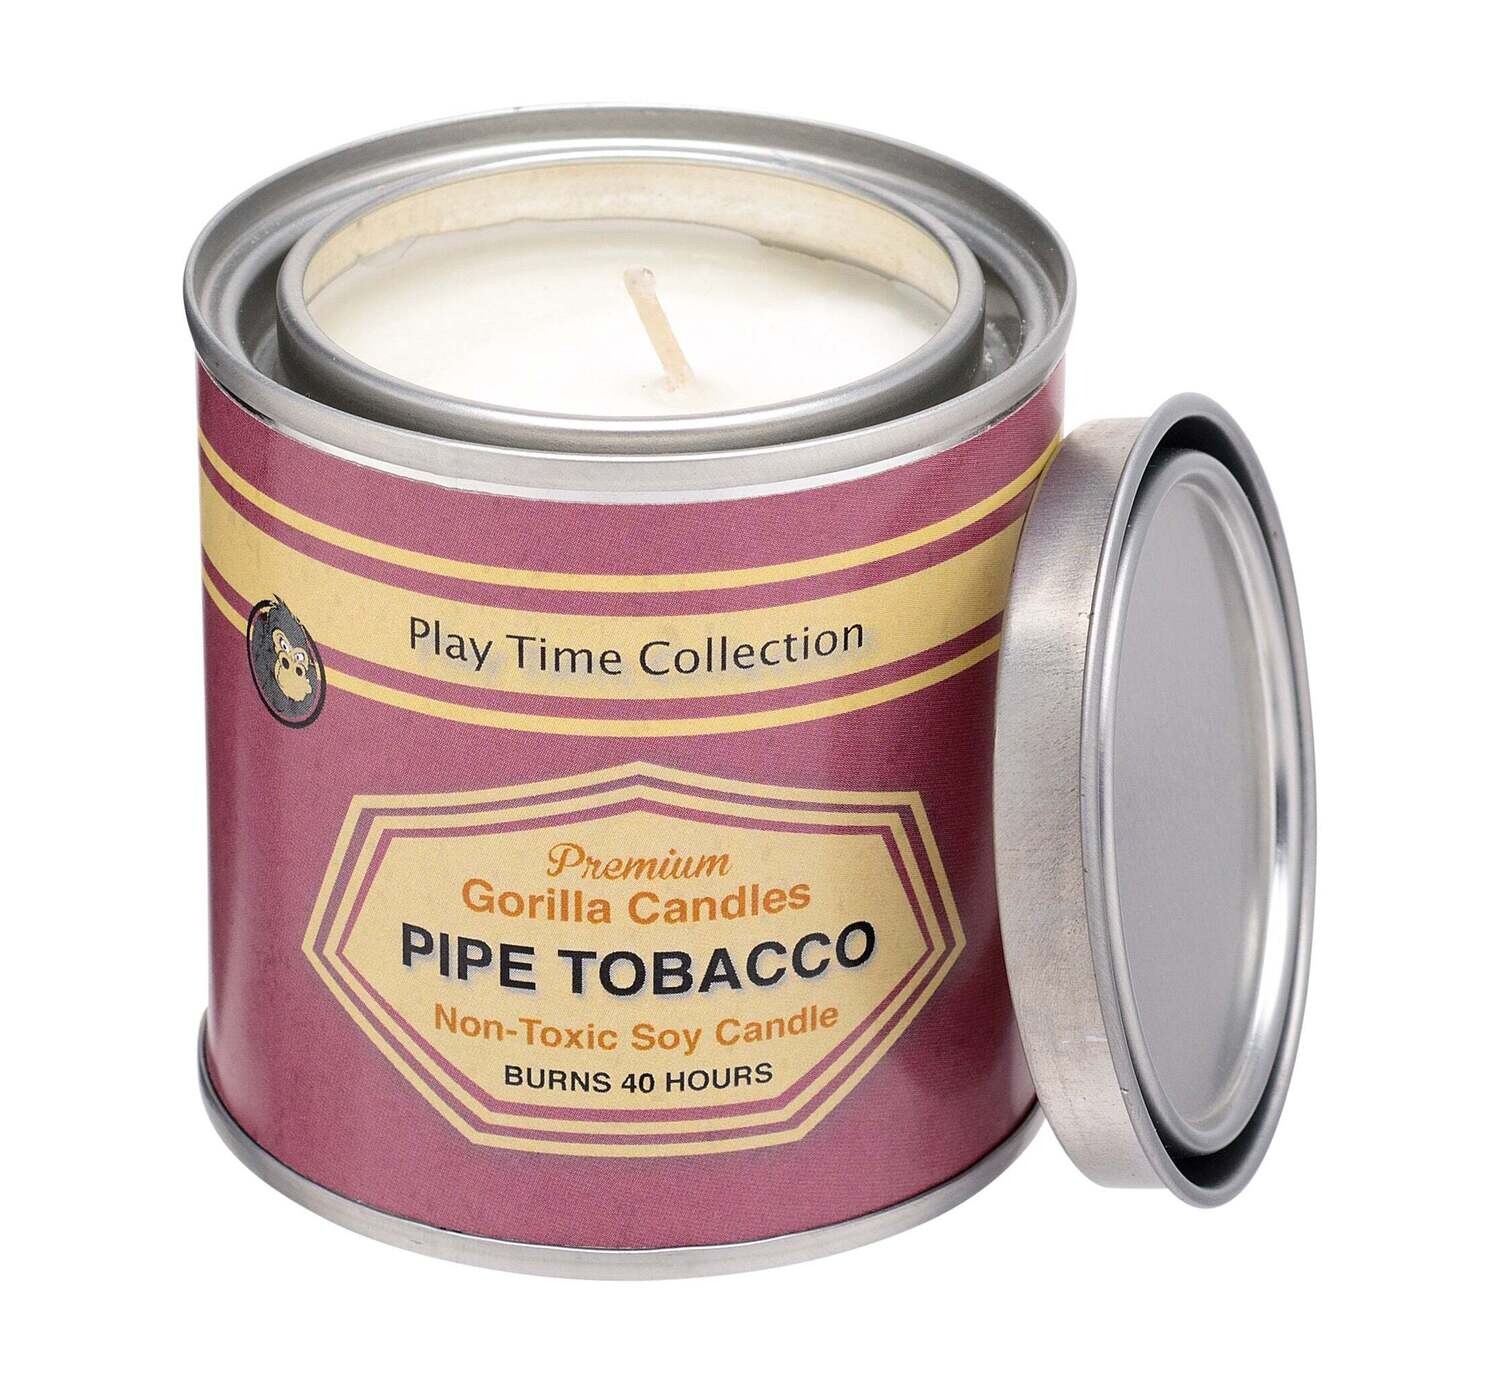 Pipe Tobacco Scented Candle